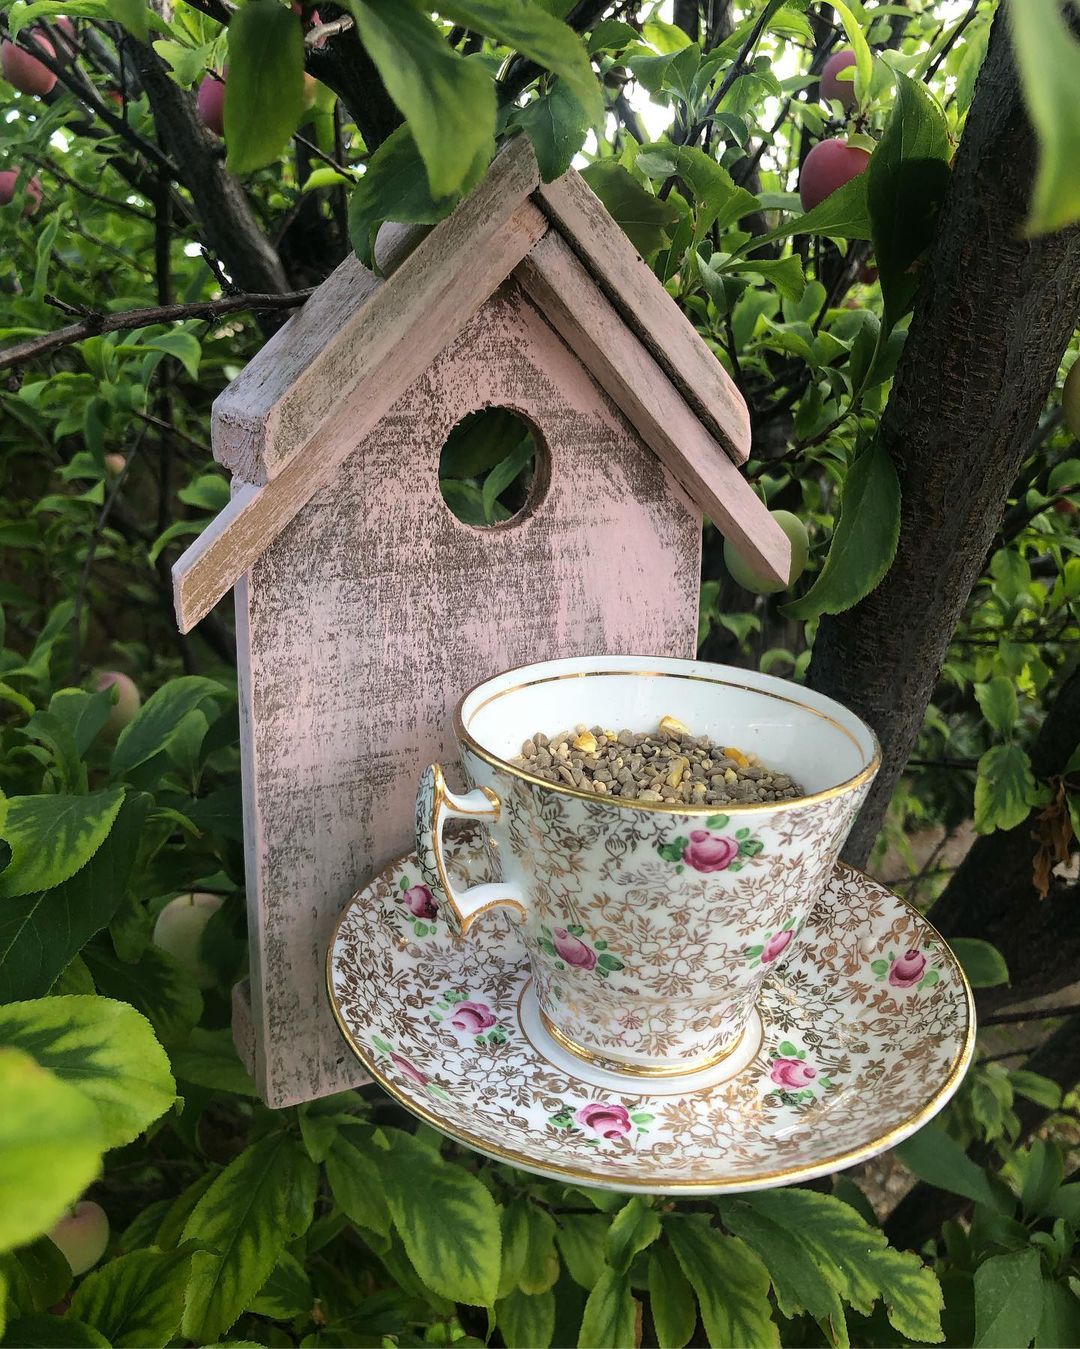 Rustic bird feeder made out of neutral wood and a teacup set. Photo by instagram user @vintage_turned_green